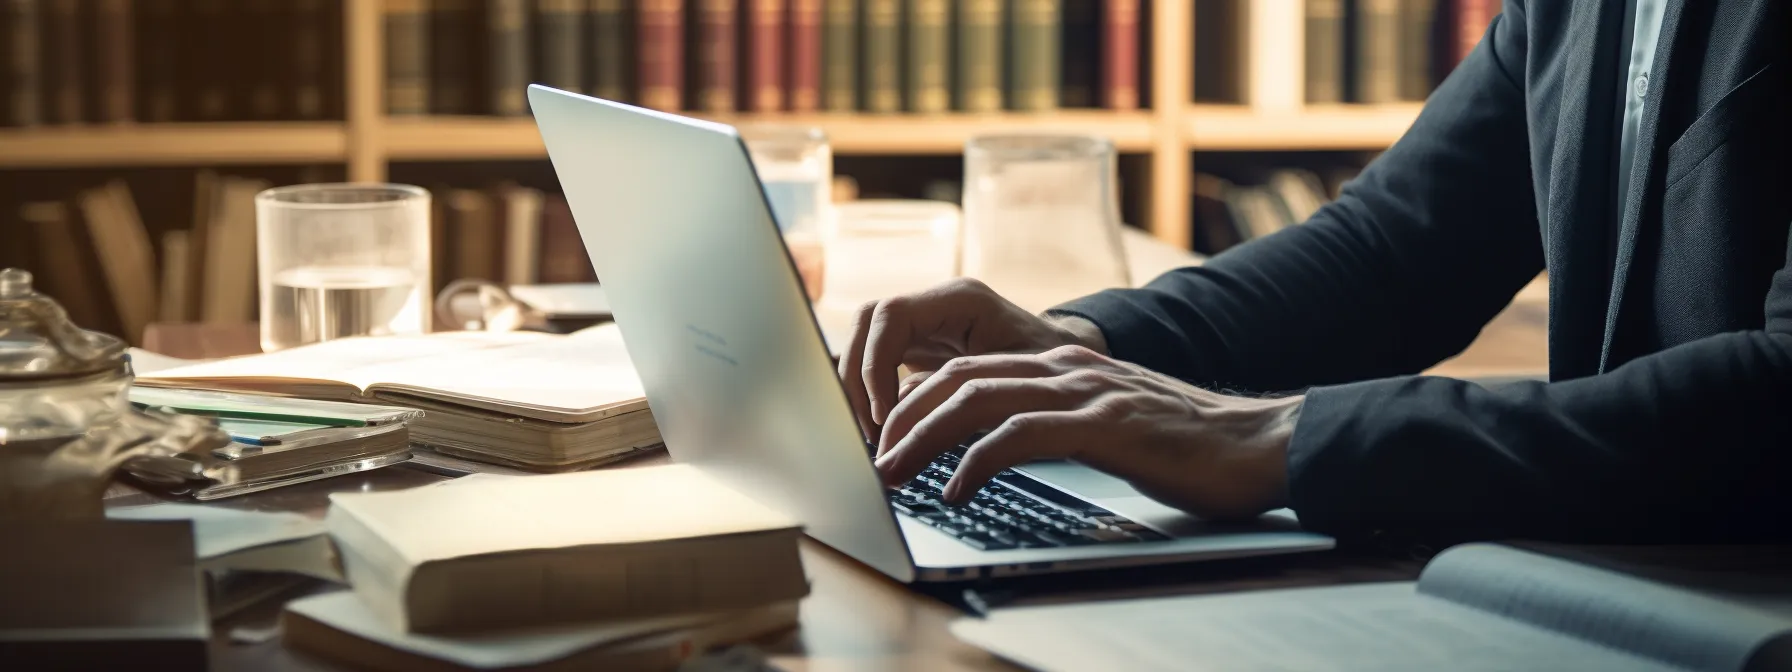 a person searching online for contract breach attorneys on a laptop, surrounded by papers and legal books.